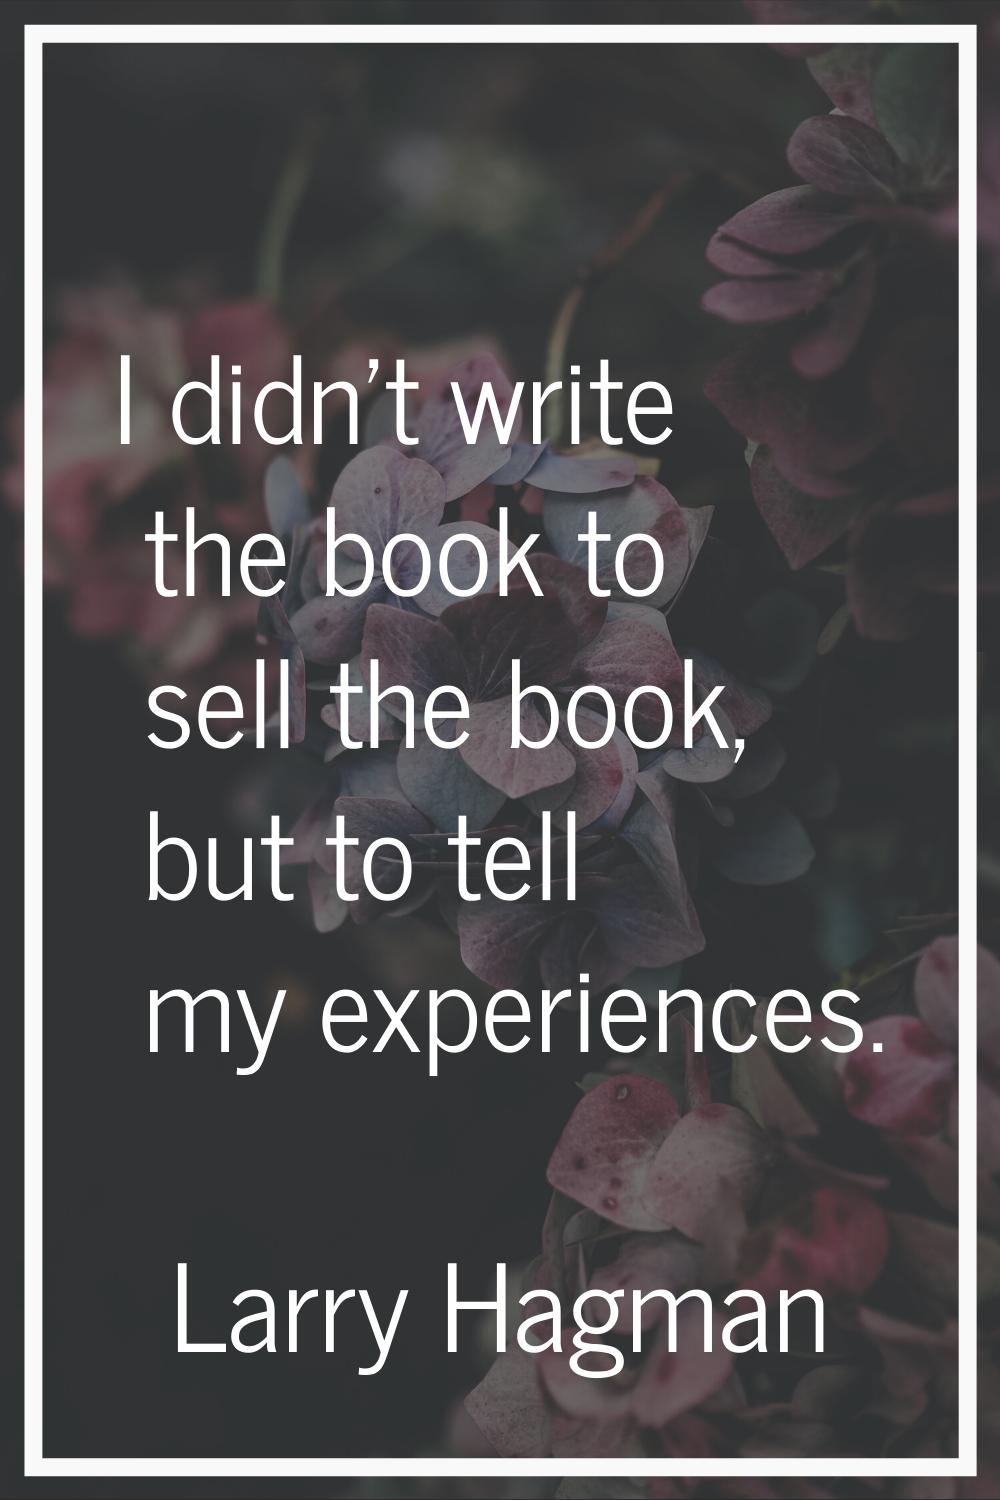 I didn't write the book to sell the book, but to tell my experiences.